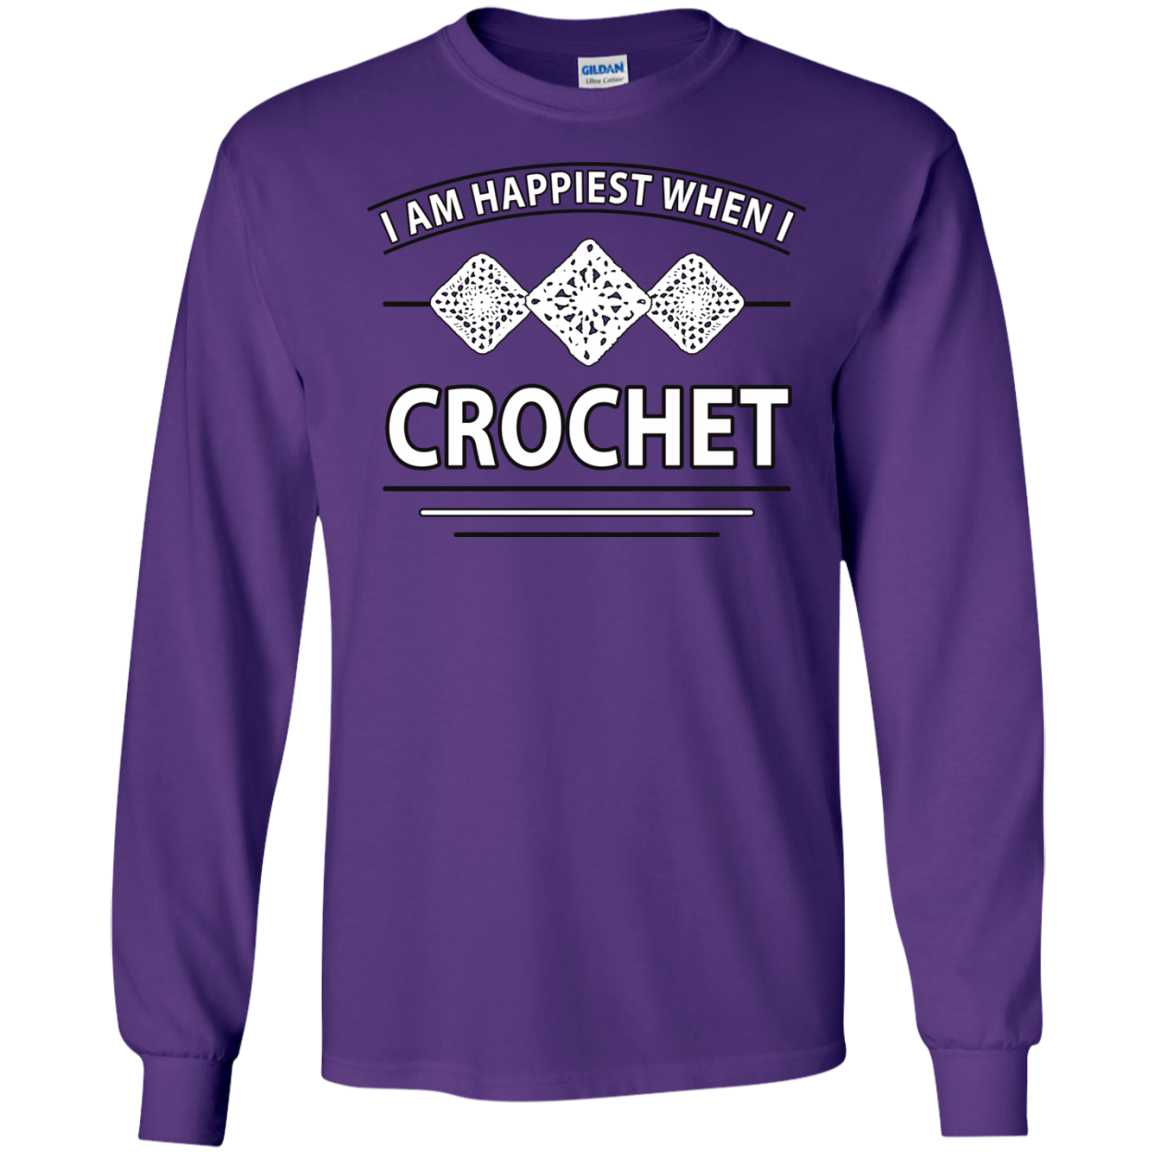 I Am Happiest When I Crochet Long Sleeve Ultra Cotton T-shirt - Crafter4Life - 1